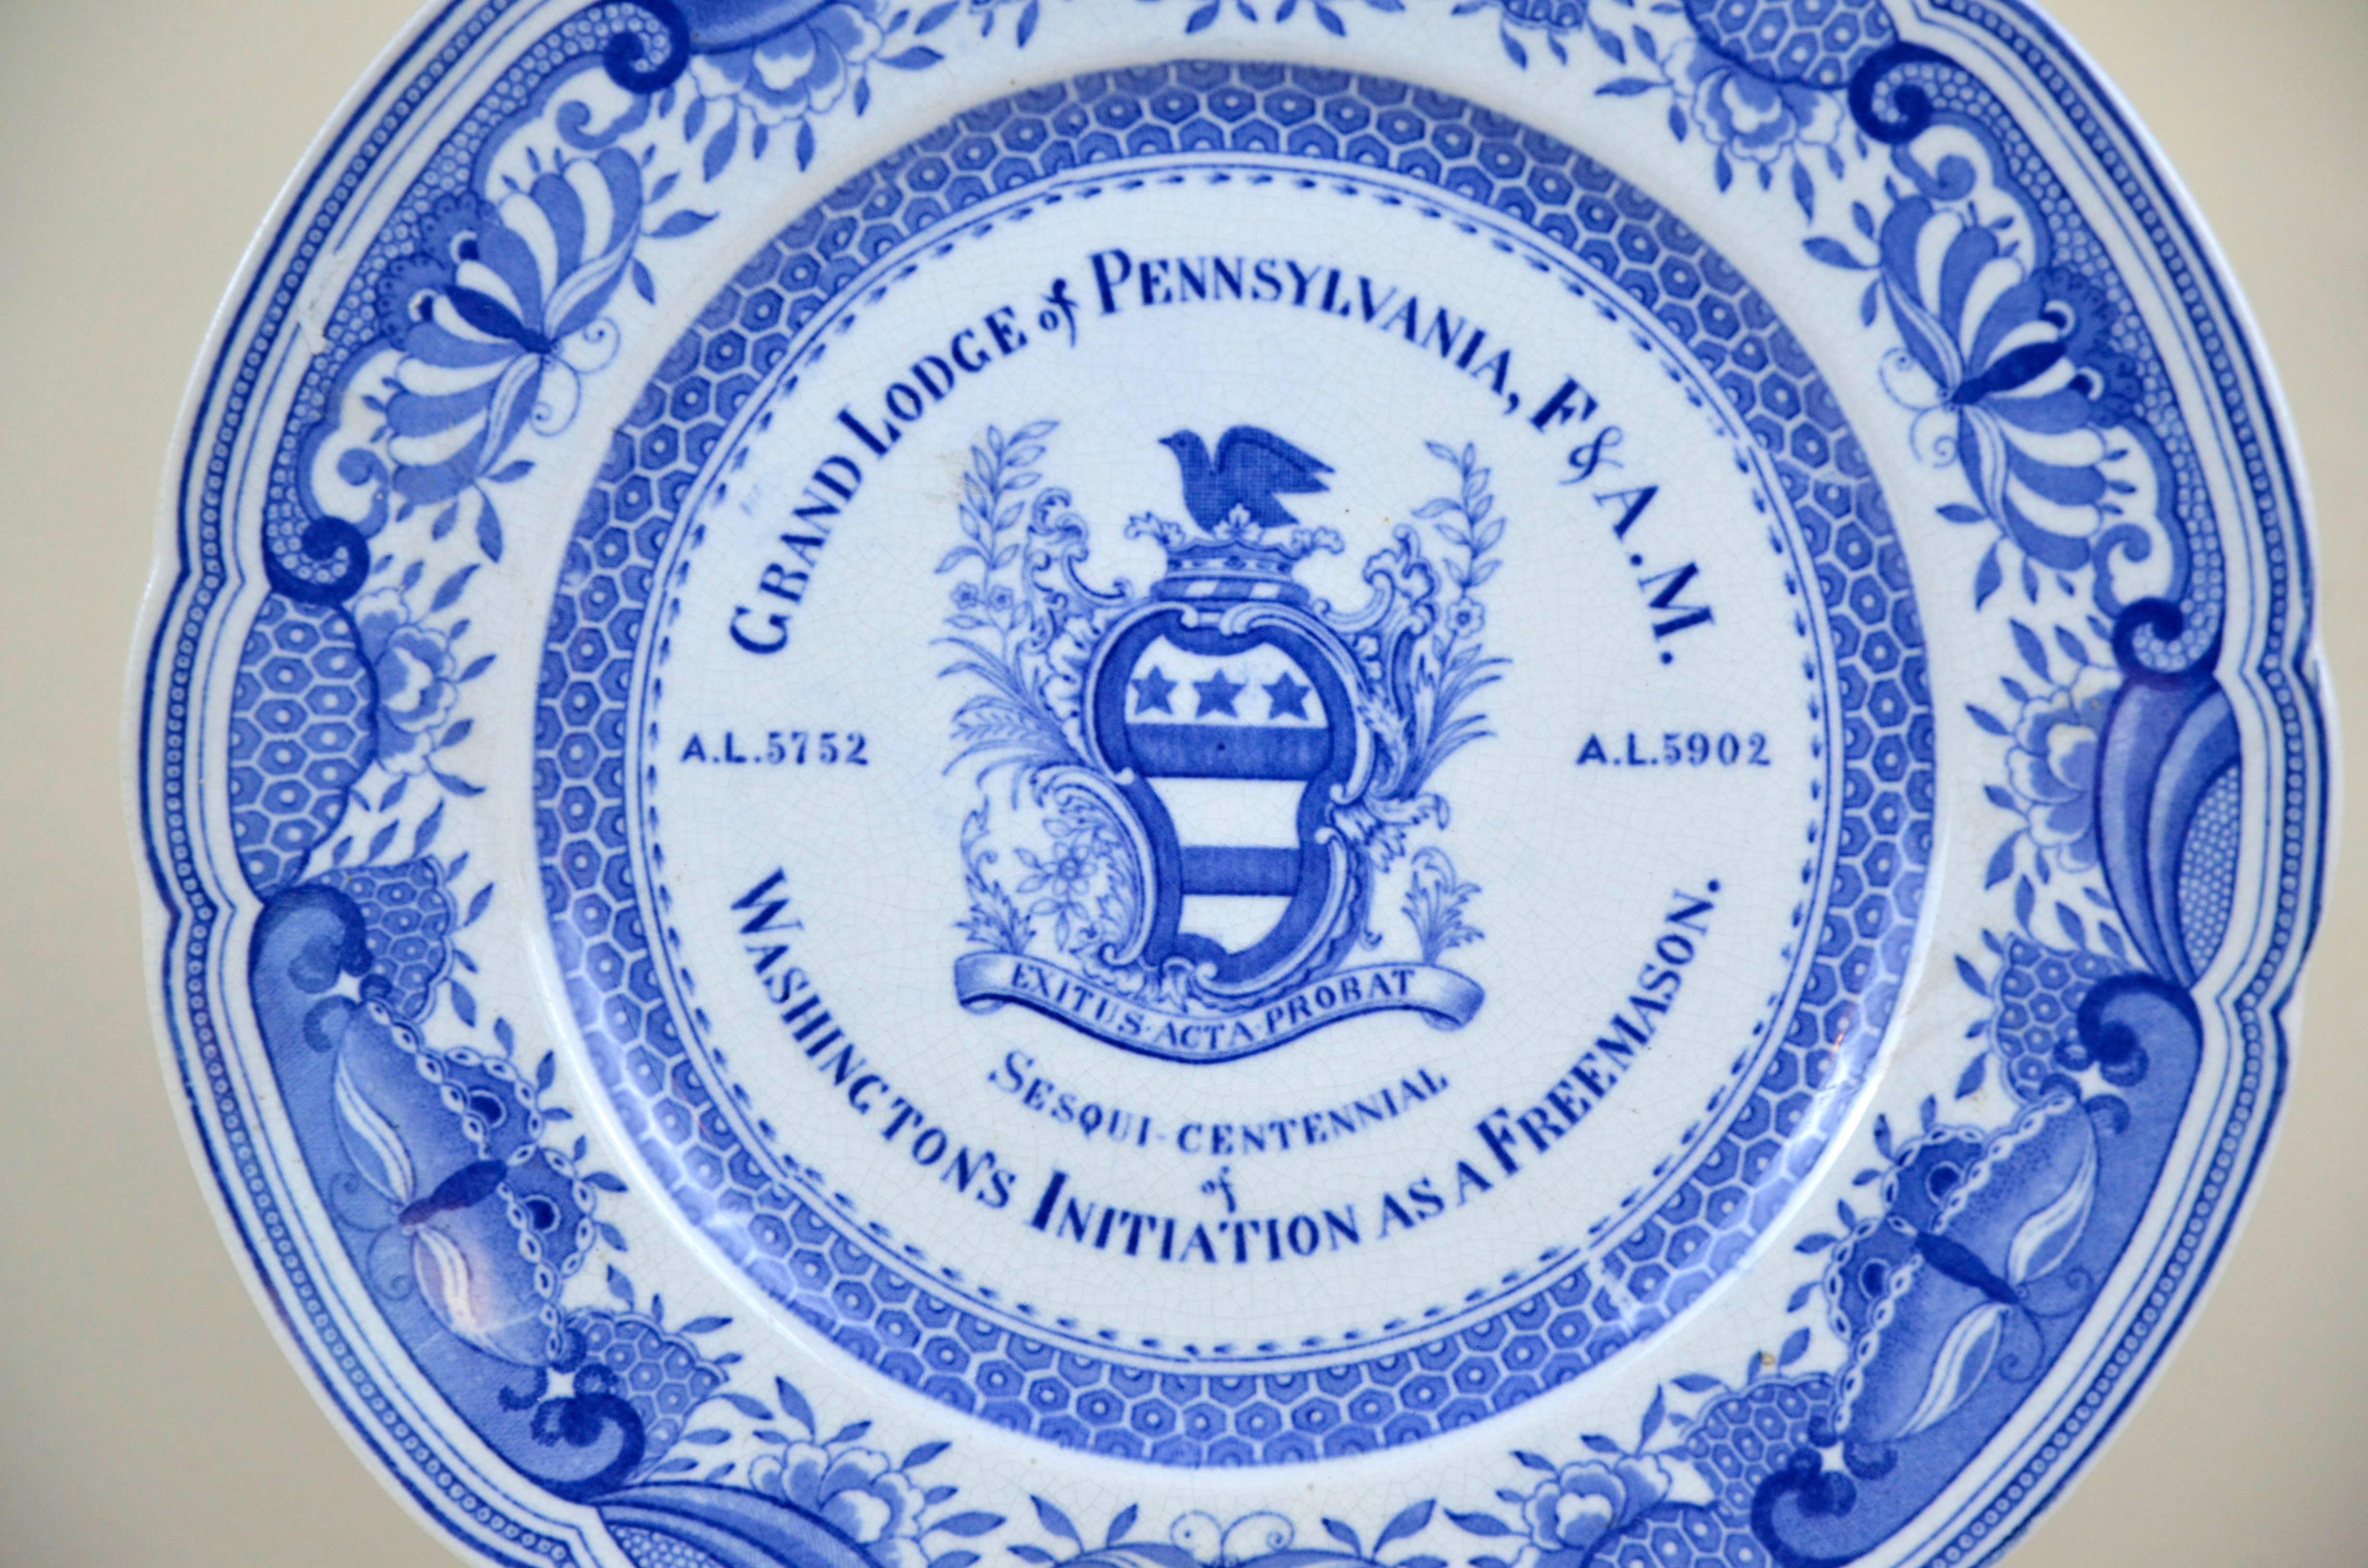 Very rare original antique 1902 Grand Lodge of Pennsylvania, F. & A. M. (Free & Accepted Masons) plate commemorating the Sesqui-Centennial of Washington's Initiation as a Freemason . The plate is decorated with an art nouveau/aesthetic movement